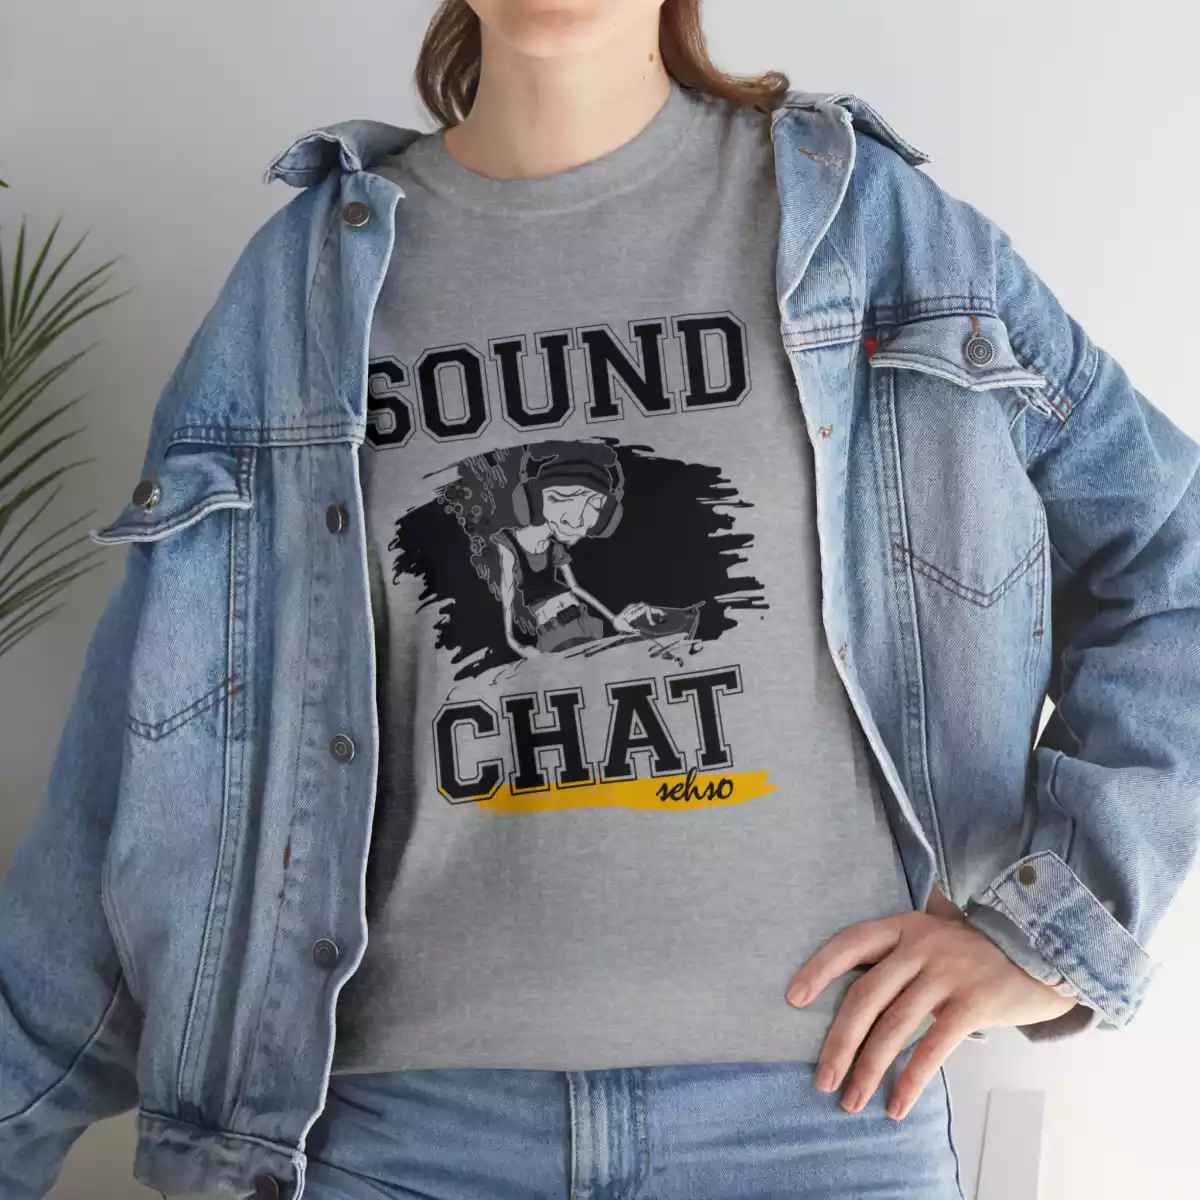 Soundchat Sehso